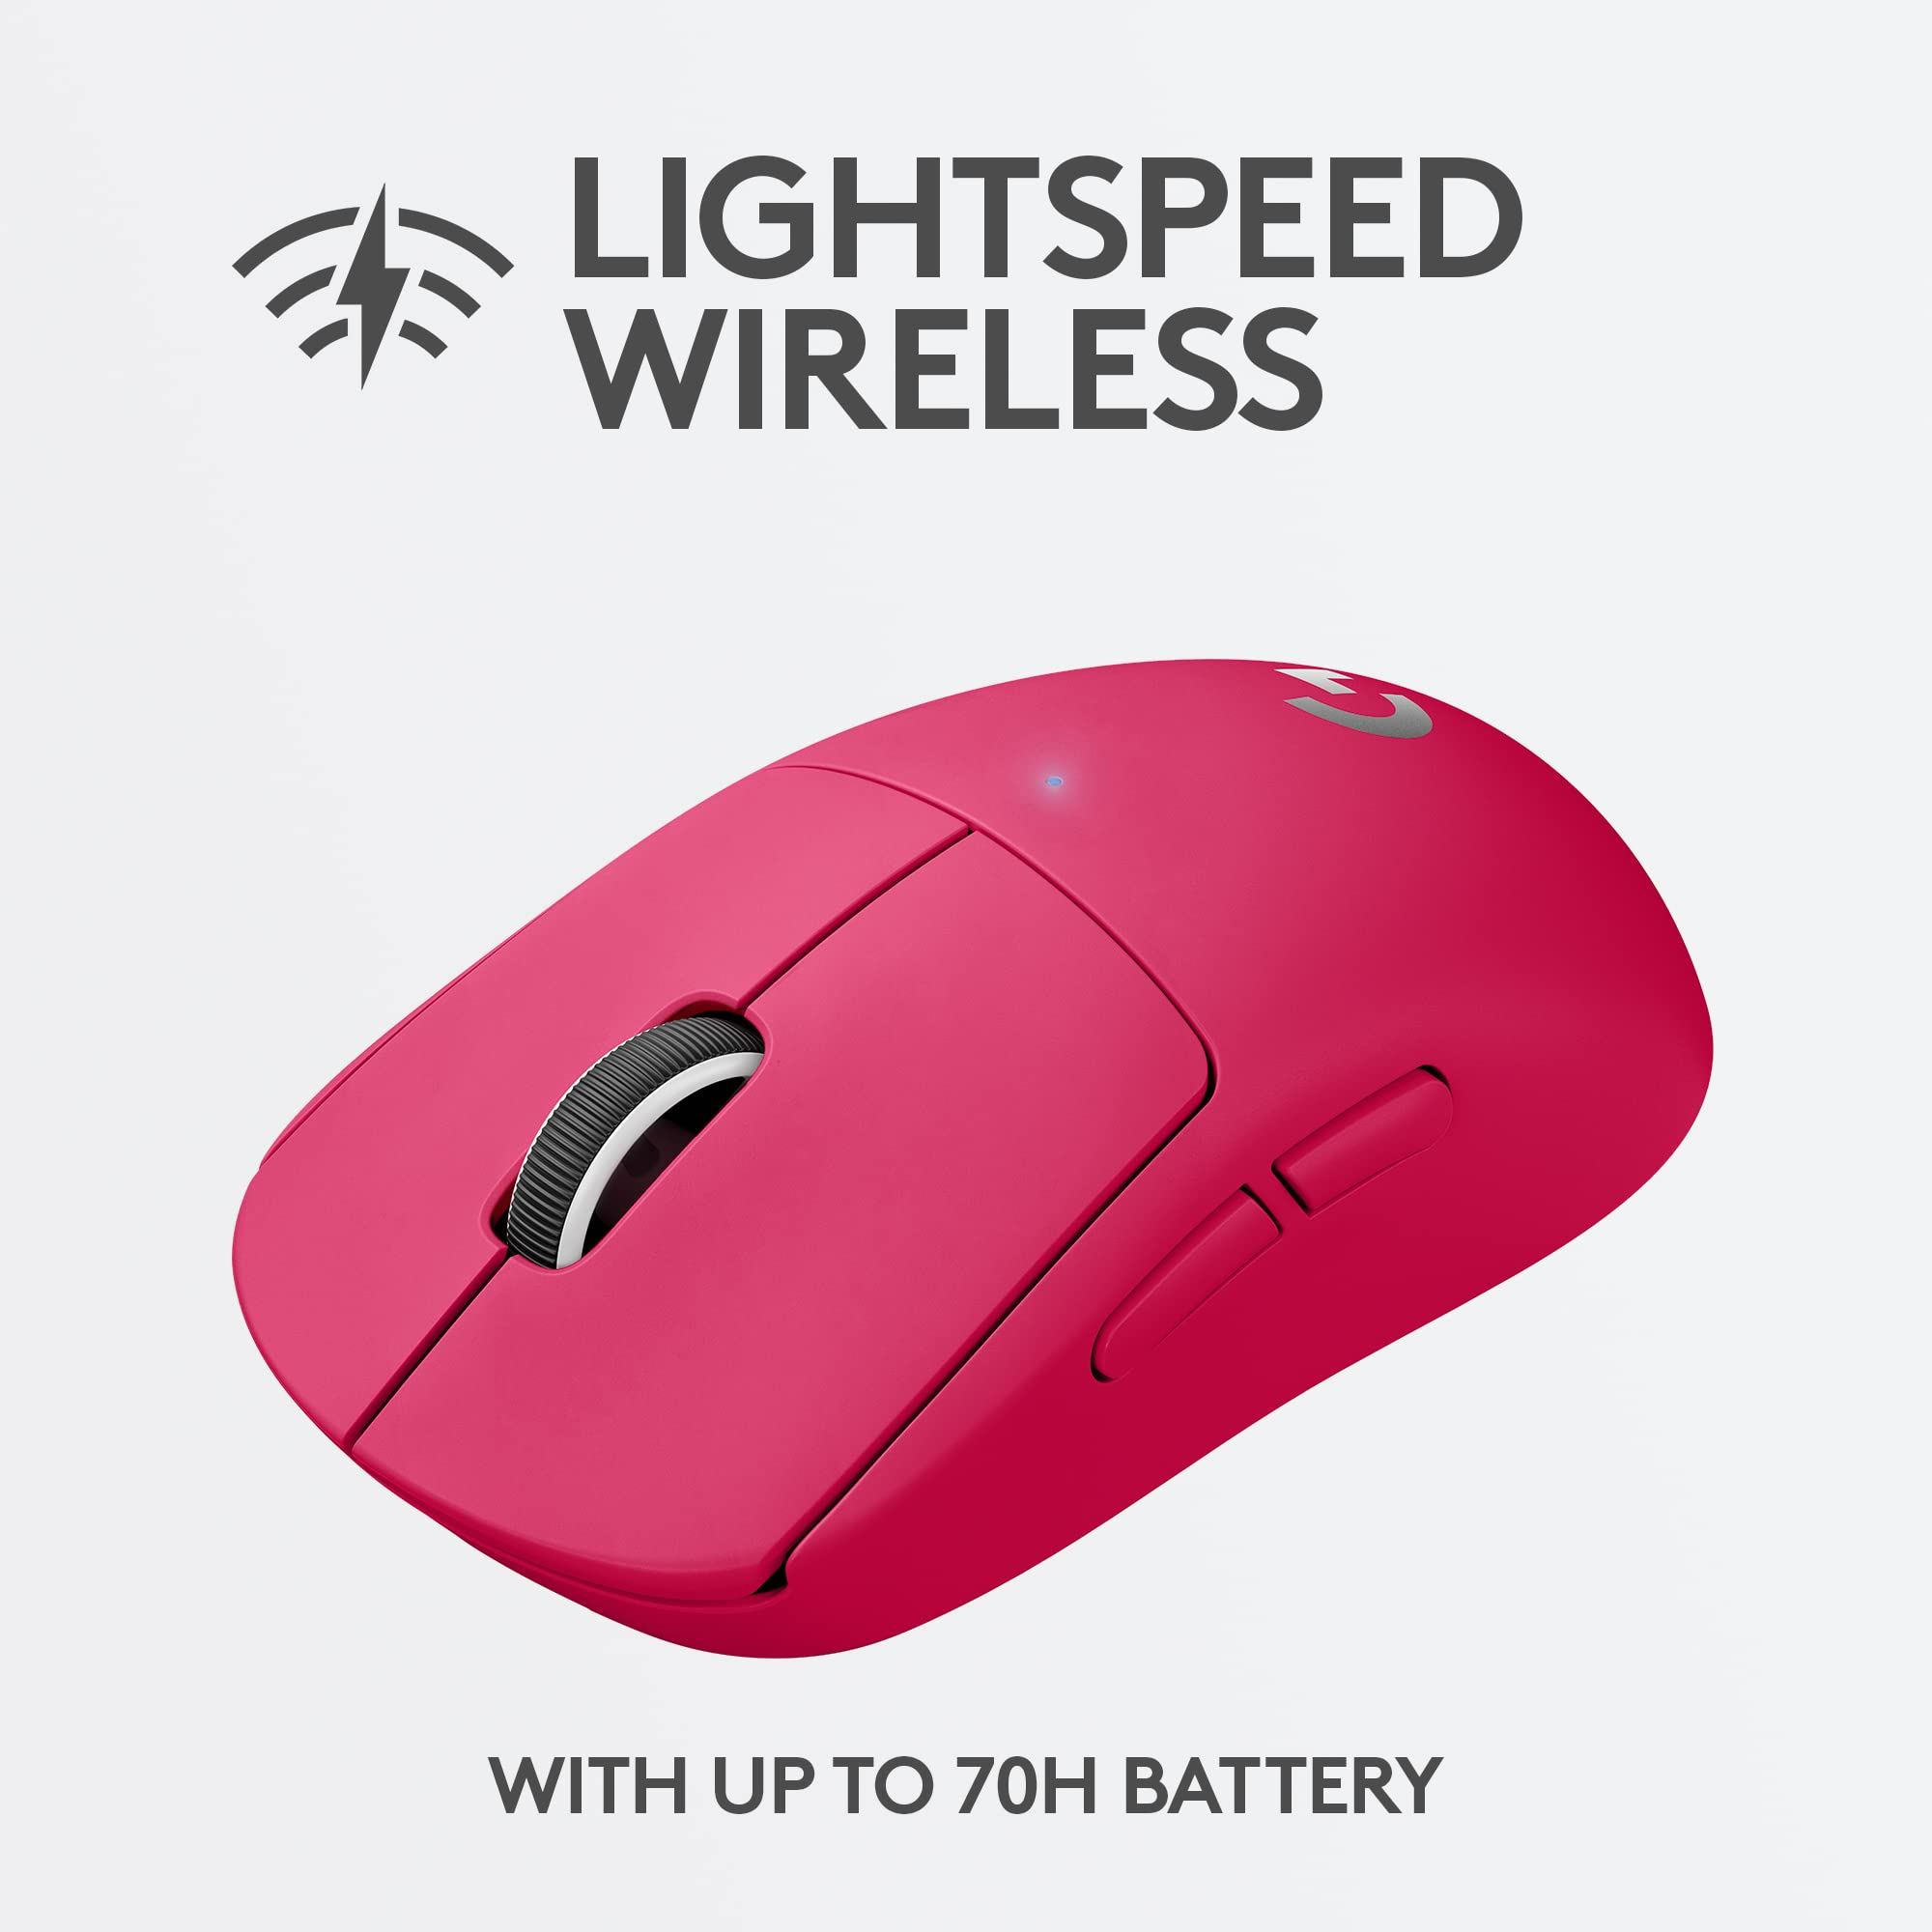 Wireless mouse with a red X